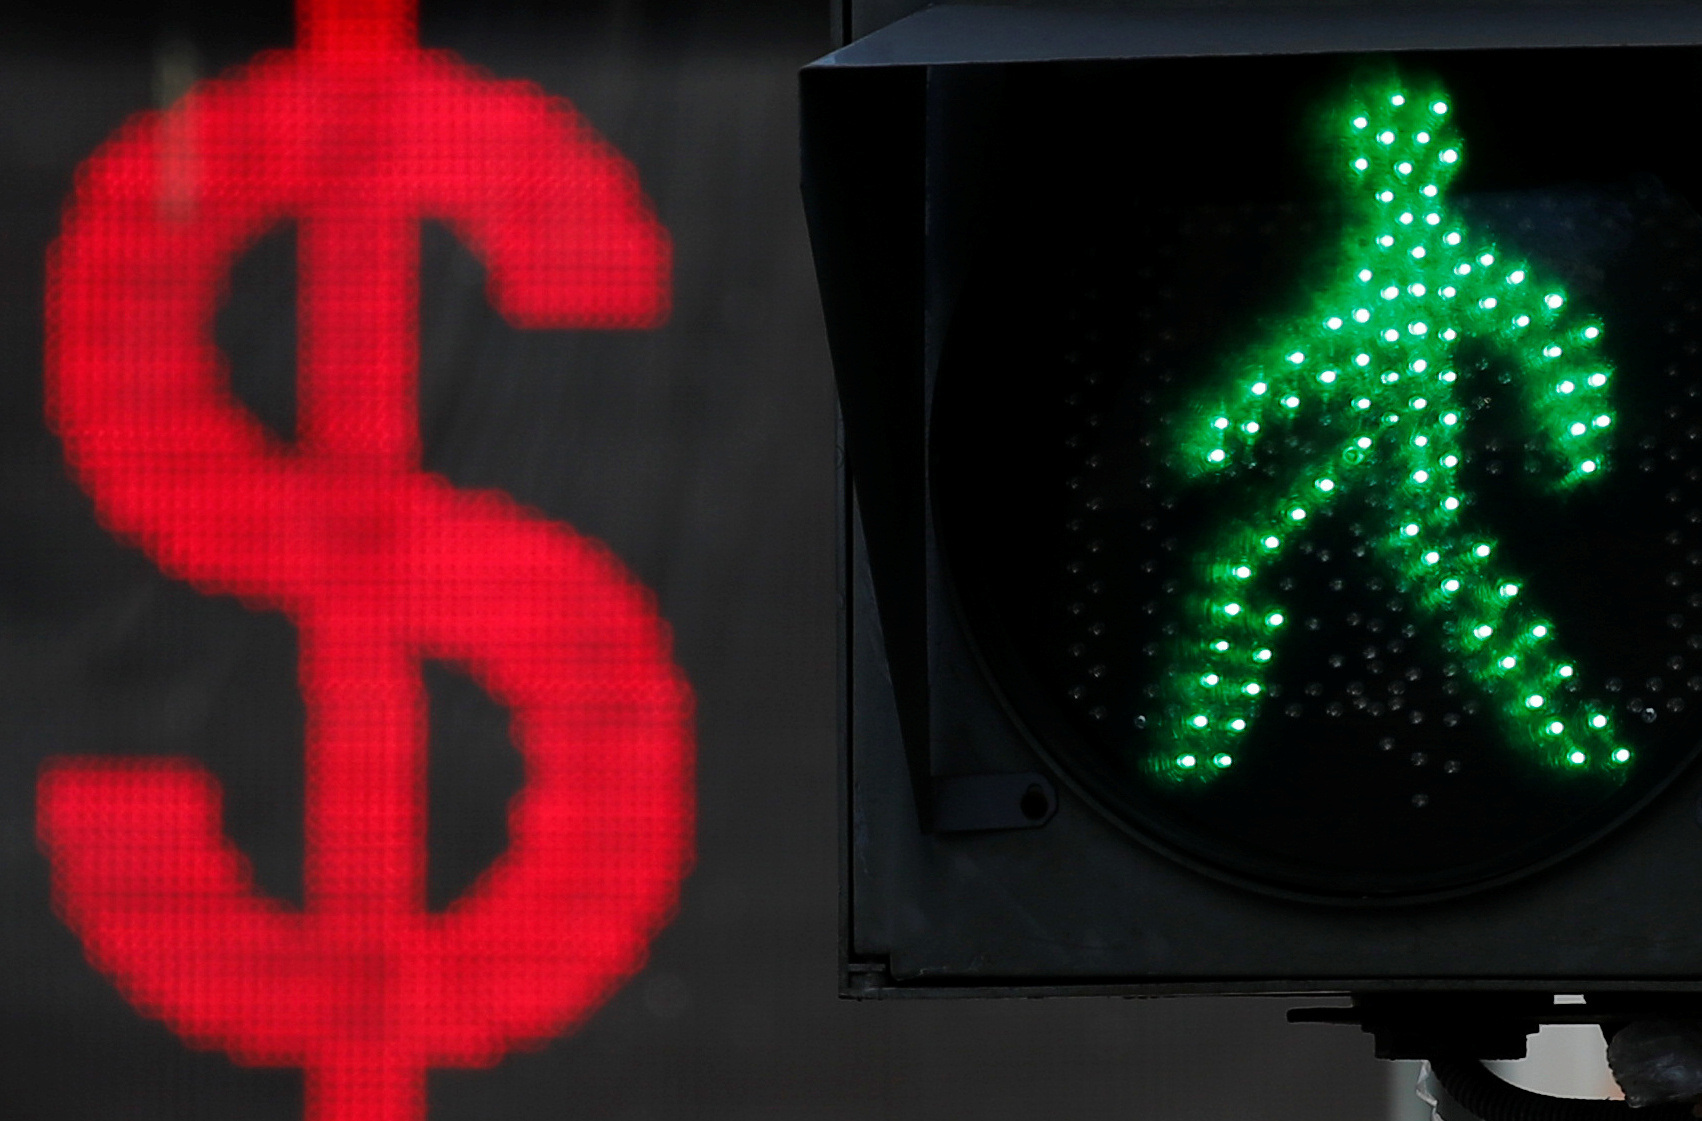 The U.S. dollar sign is seen on an electronic board next to a traffic light in Moscow